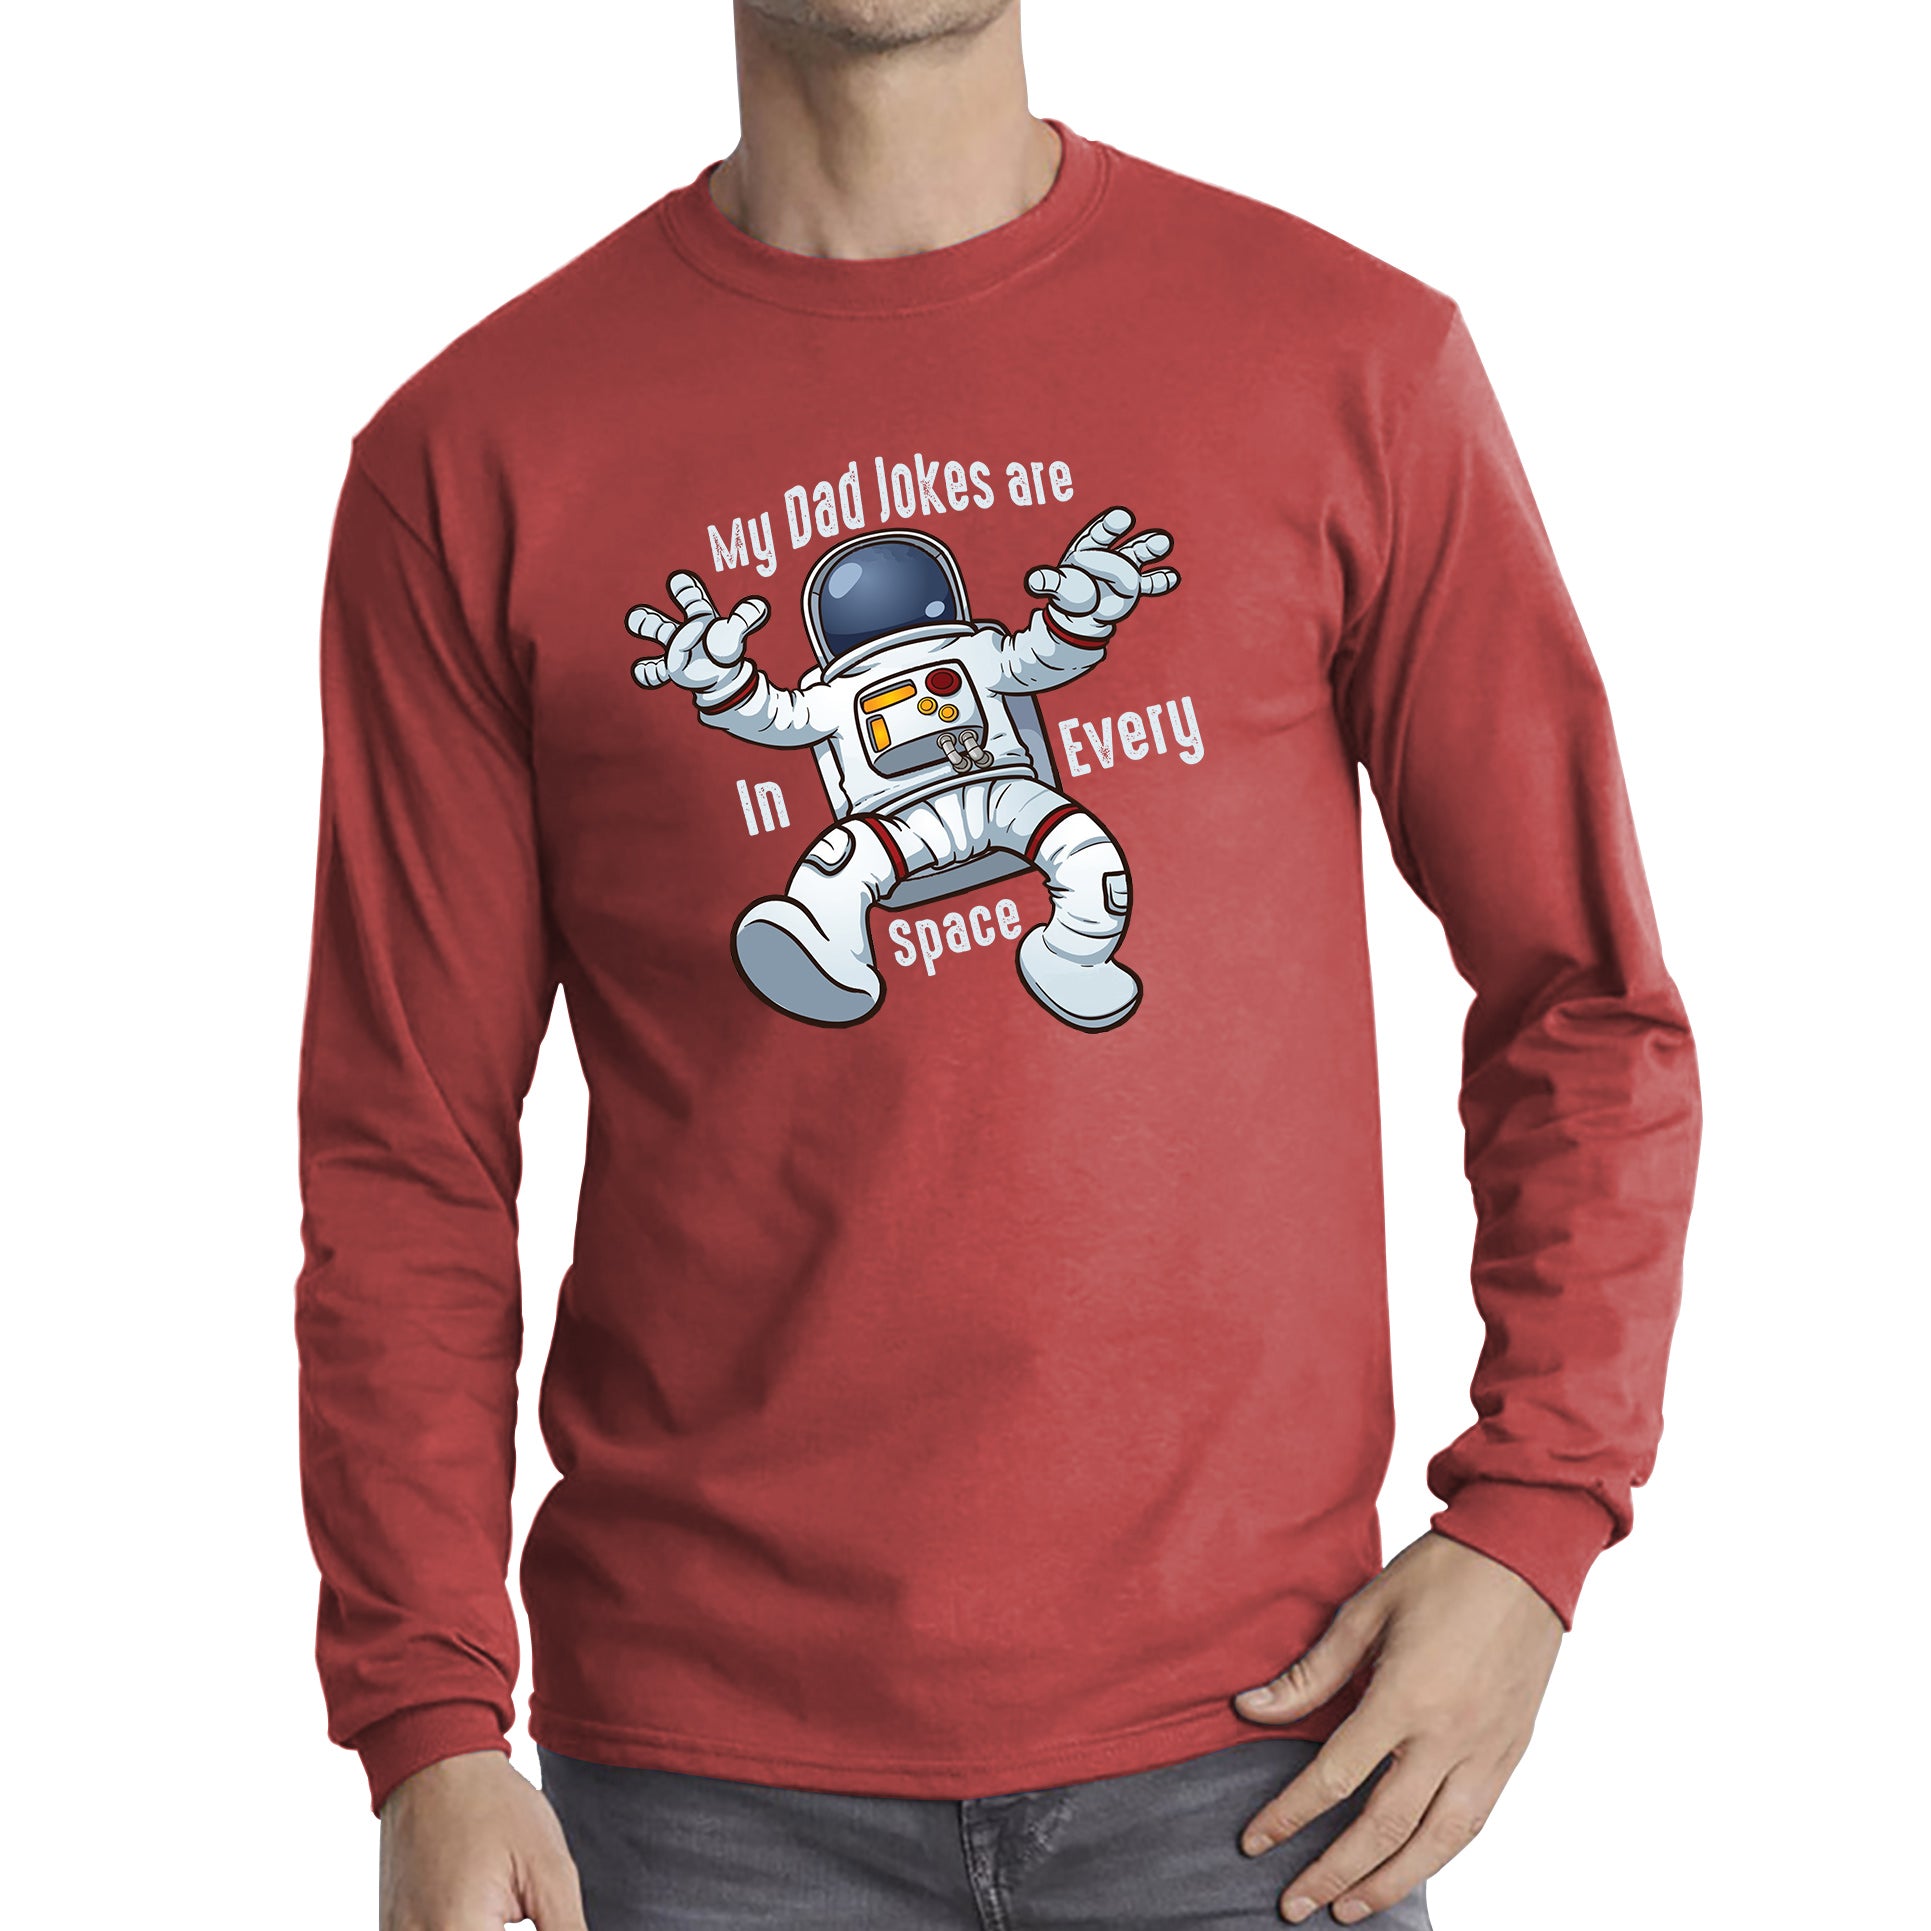 My Dad Jokes Are In Every Space - Falling Astronaut Funny Sarcastic Joke Meme Gift For Father Scientific Meme Joke Space Long Sleeve T Shirt